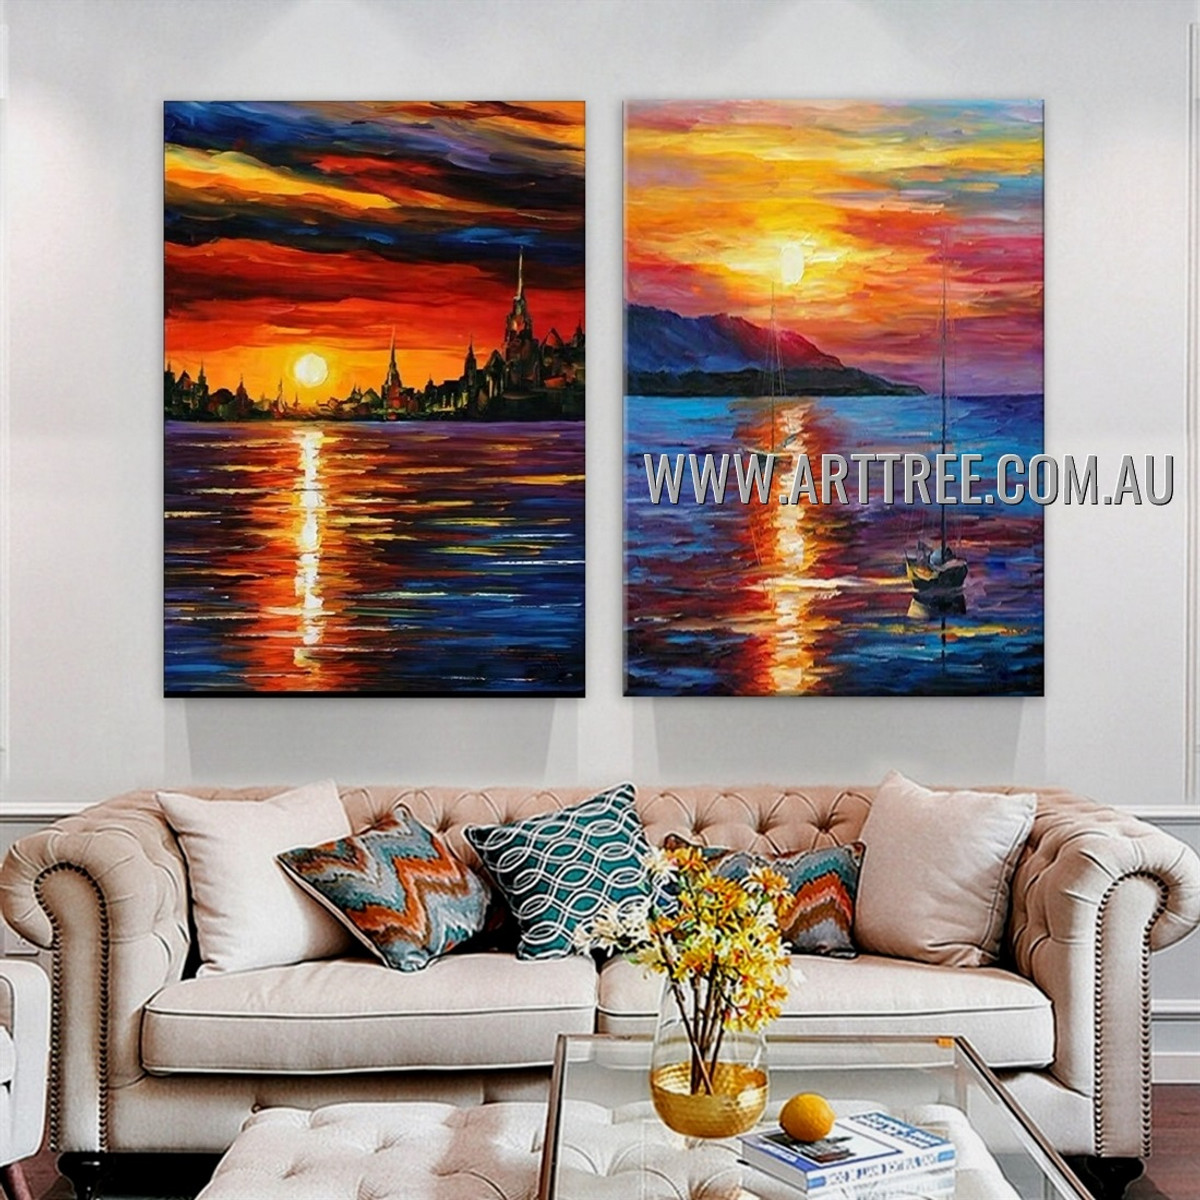 Beautiful Scenery Abstract Landscape Modern Heavy Texture Artist Handmade 2 Piece Multi Panel Canvas Painting for Room Adornment